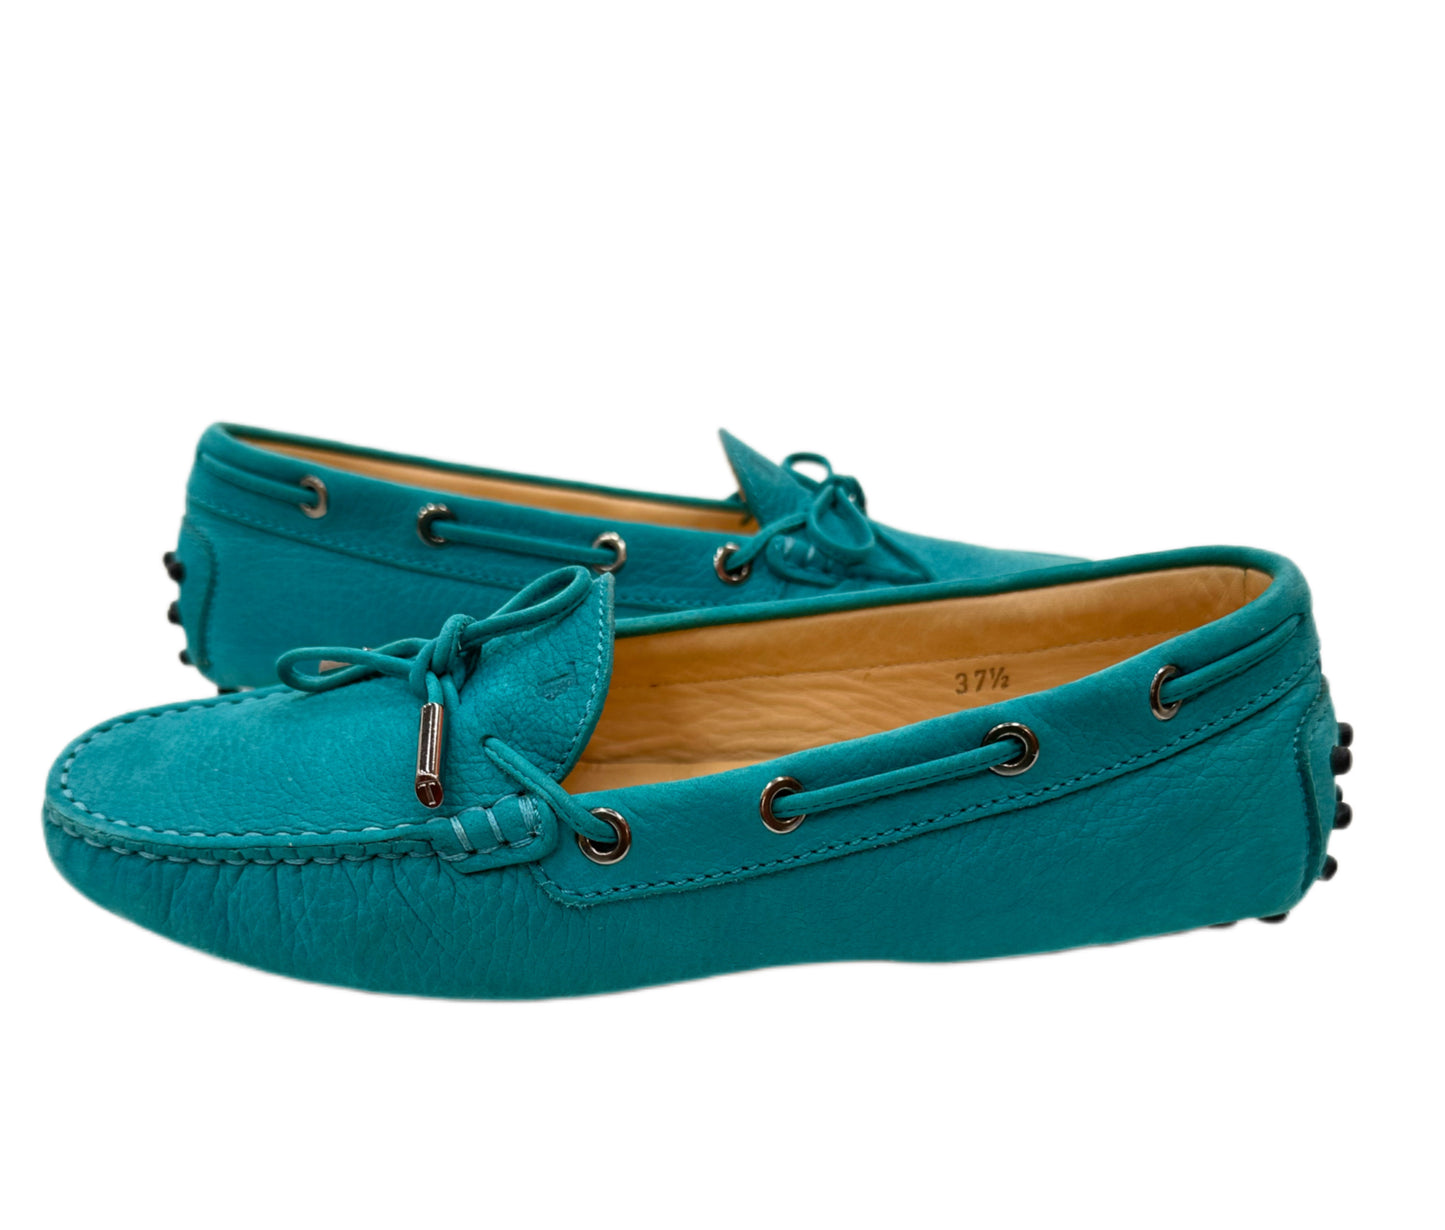 TODS Turquoise Driving Moc Size 37.5